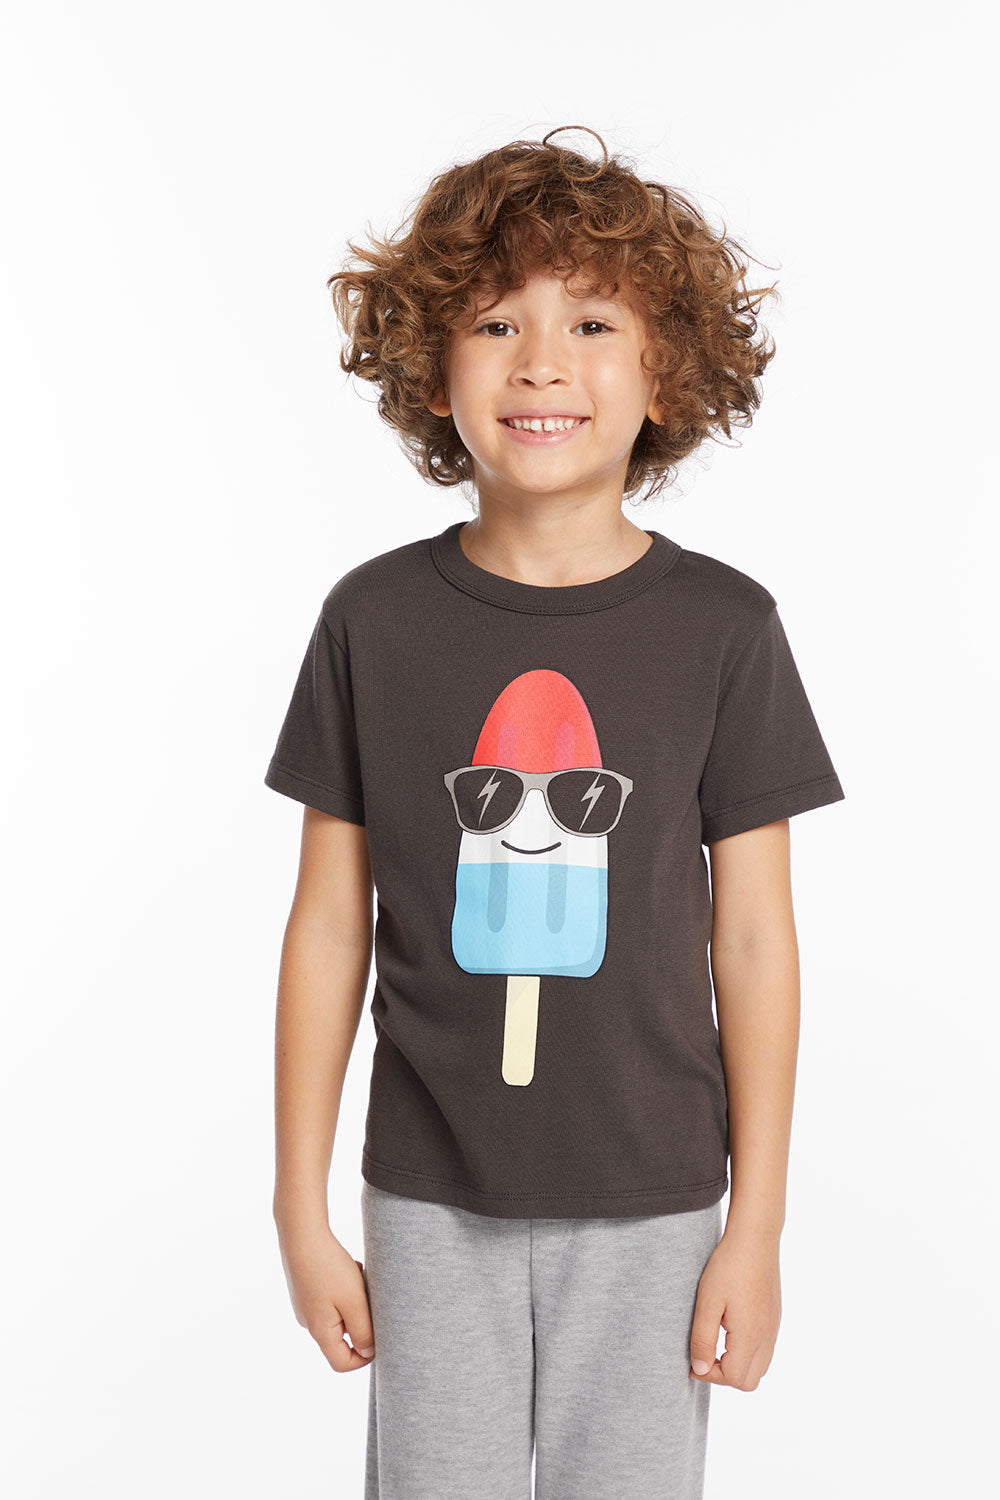 Chill Popsicle Boys Tee BOYS chaserbrand